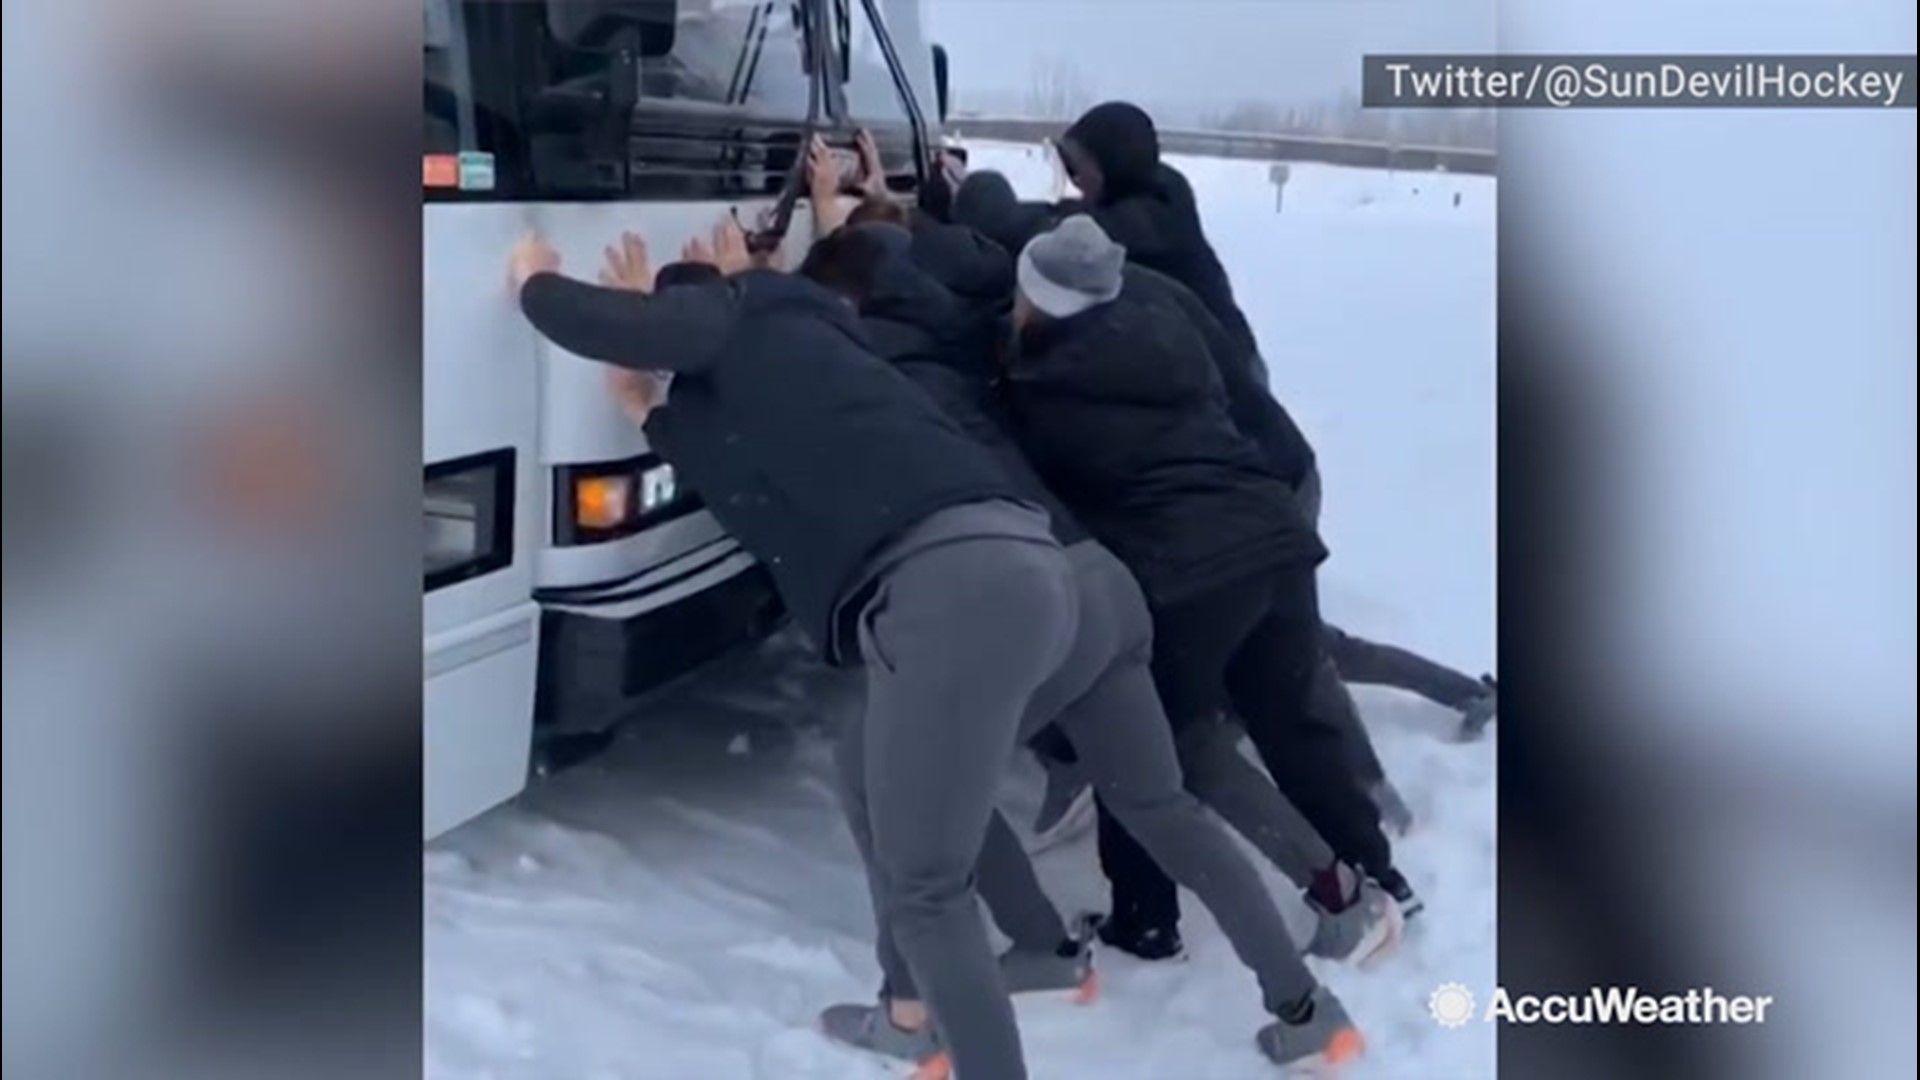 In College, Alaska, the Arizona State Sun Devils' bus became stuck in the snow on Nov. 8. The hockey team jumped into action and tried to get the bus moving again.